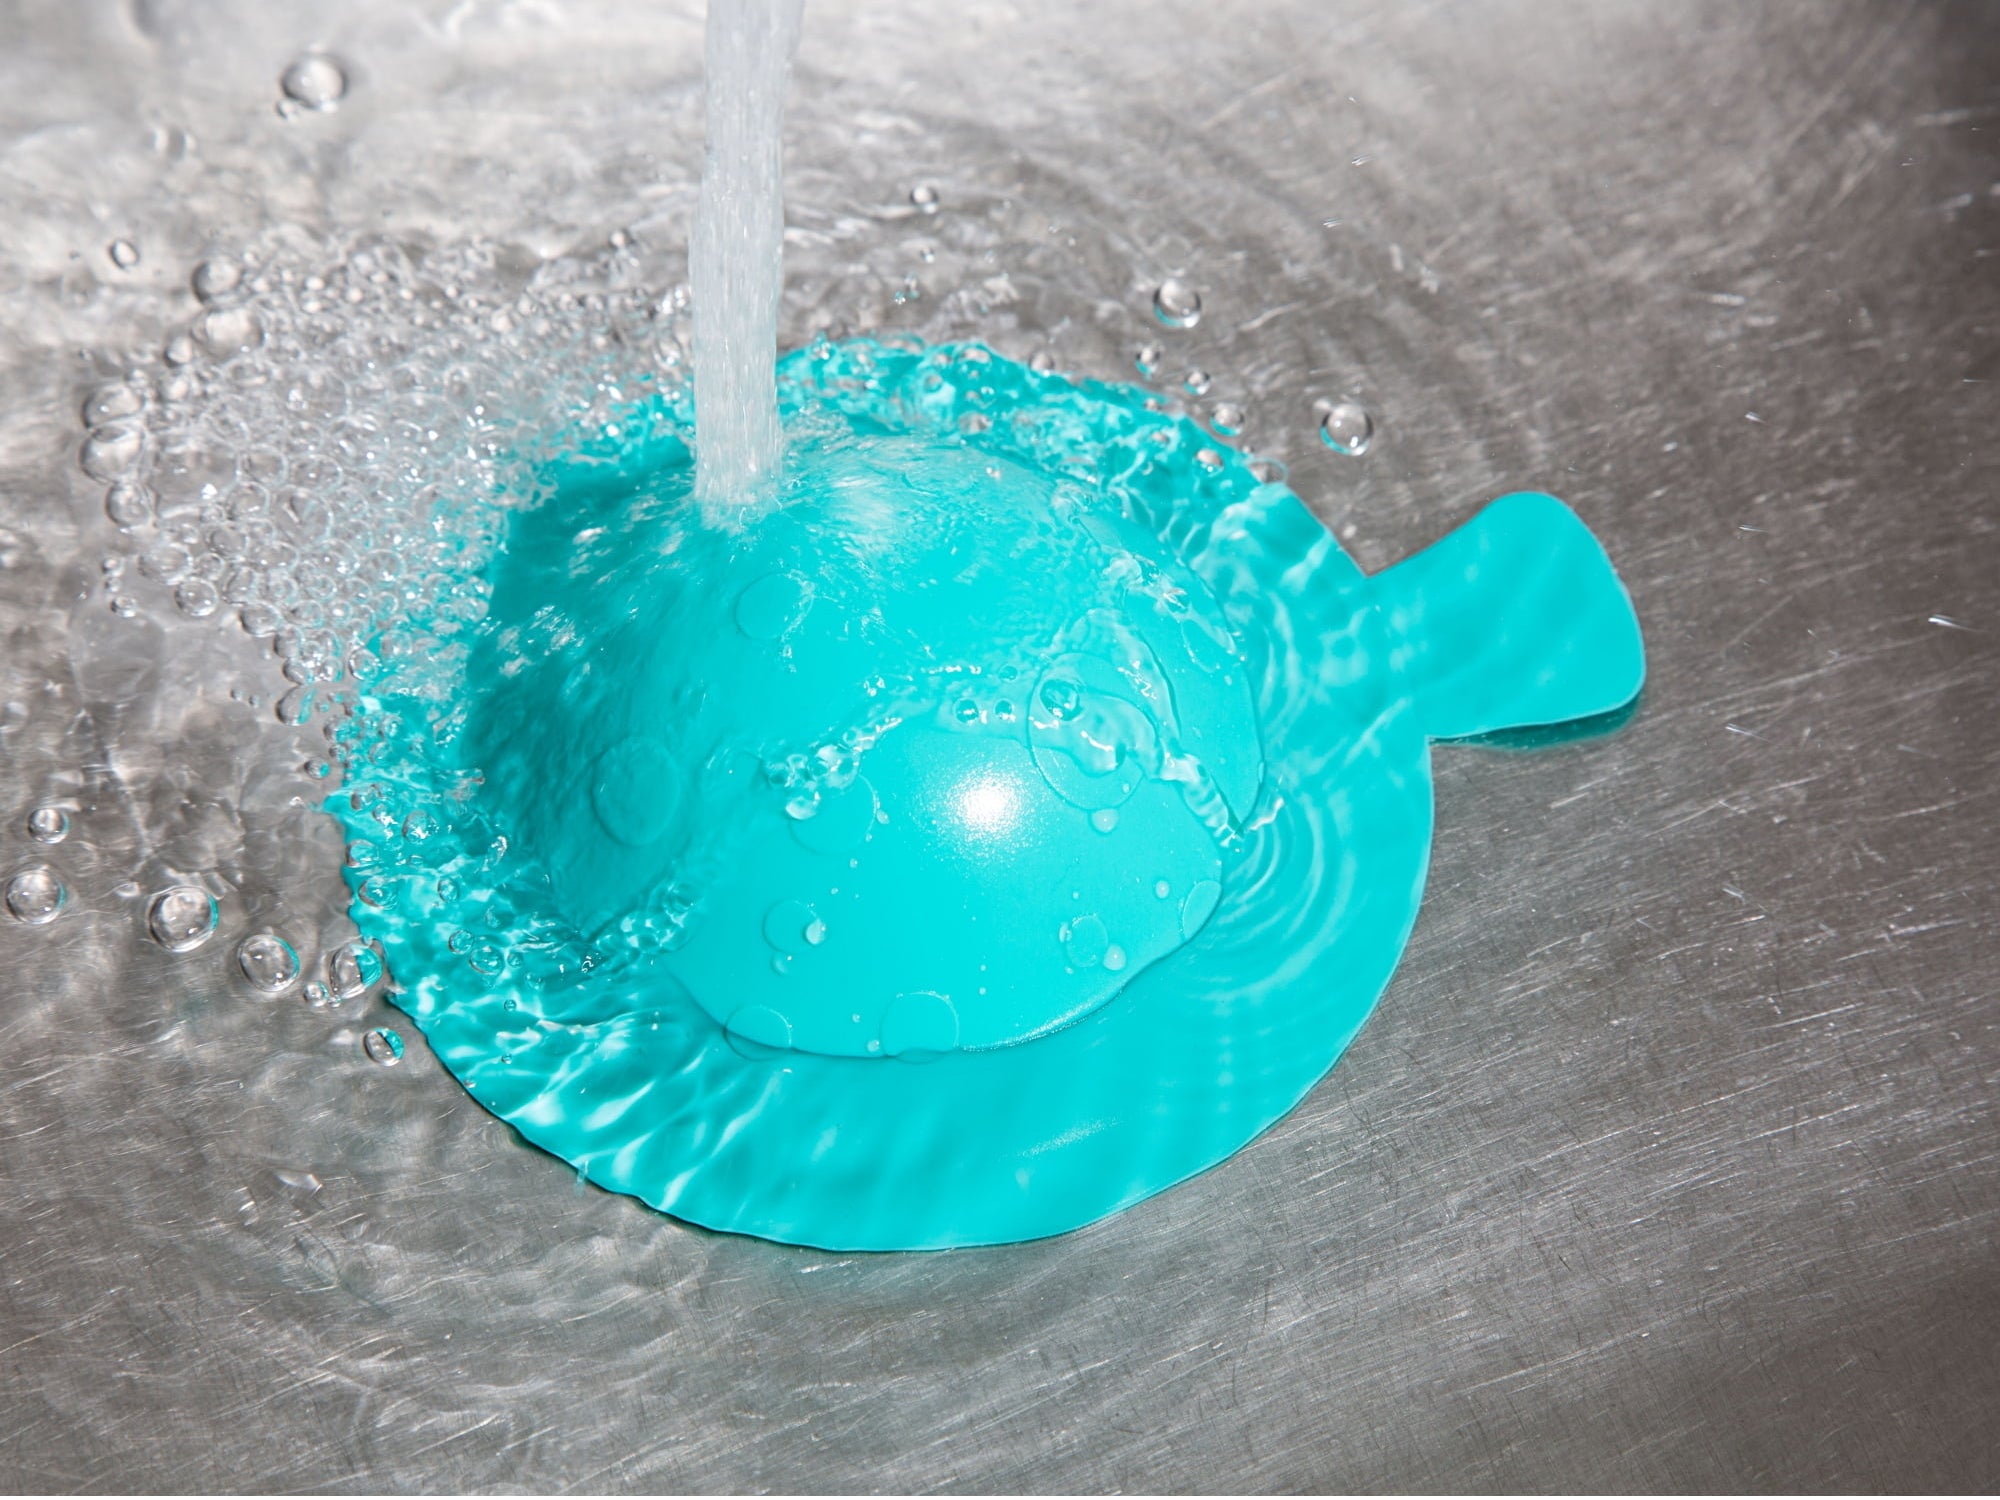 Water pouring into a teal plastic neti pot, an item used for nasal irrigation